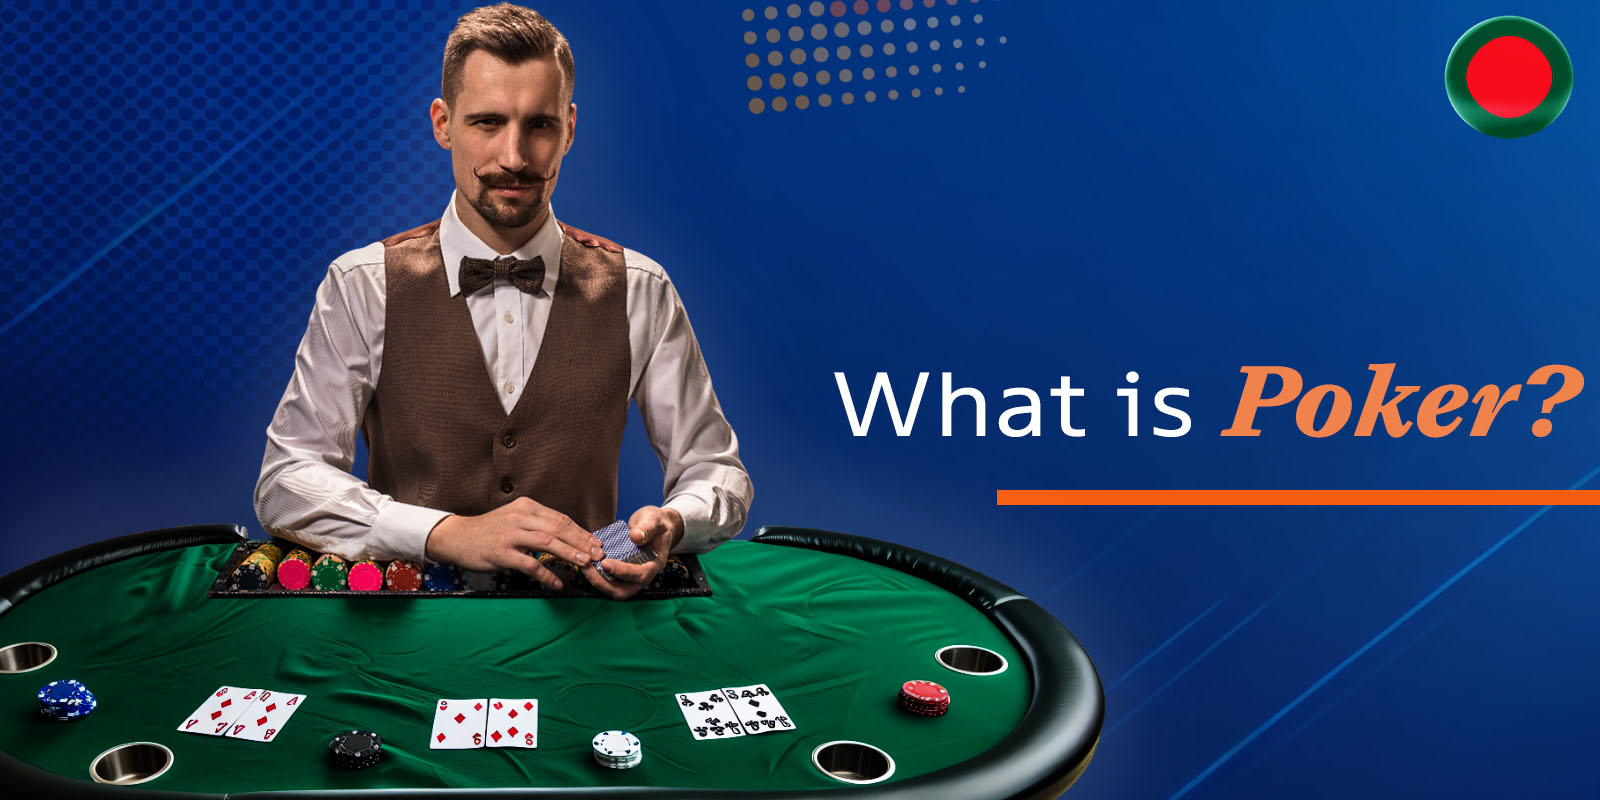 Poker is one of the most famous games in the world